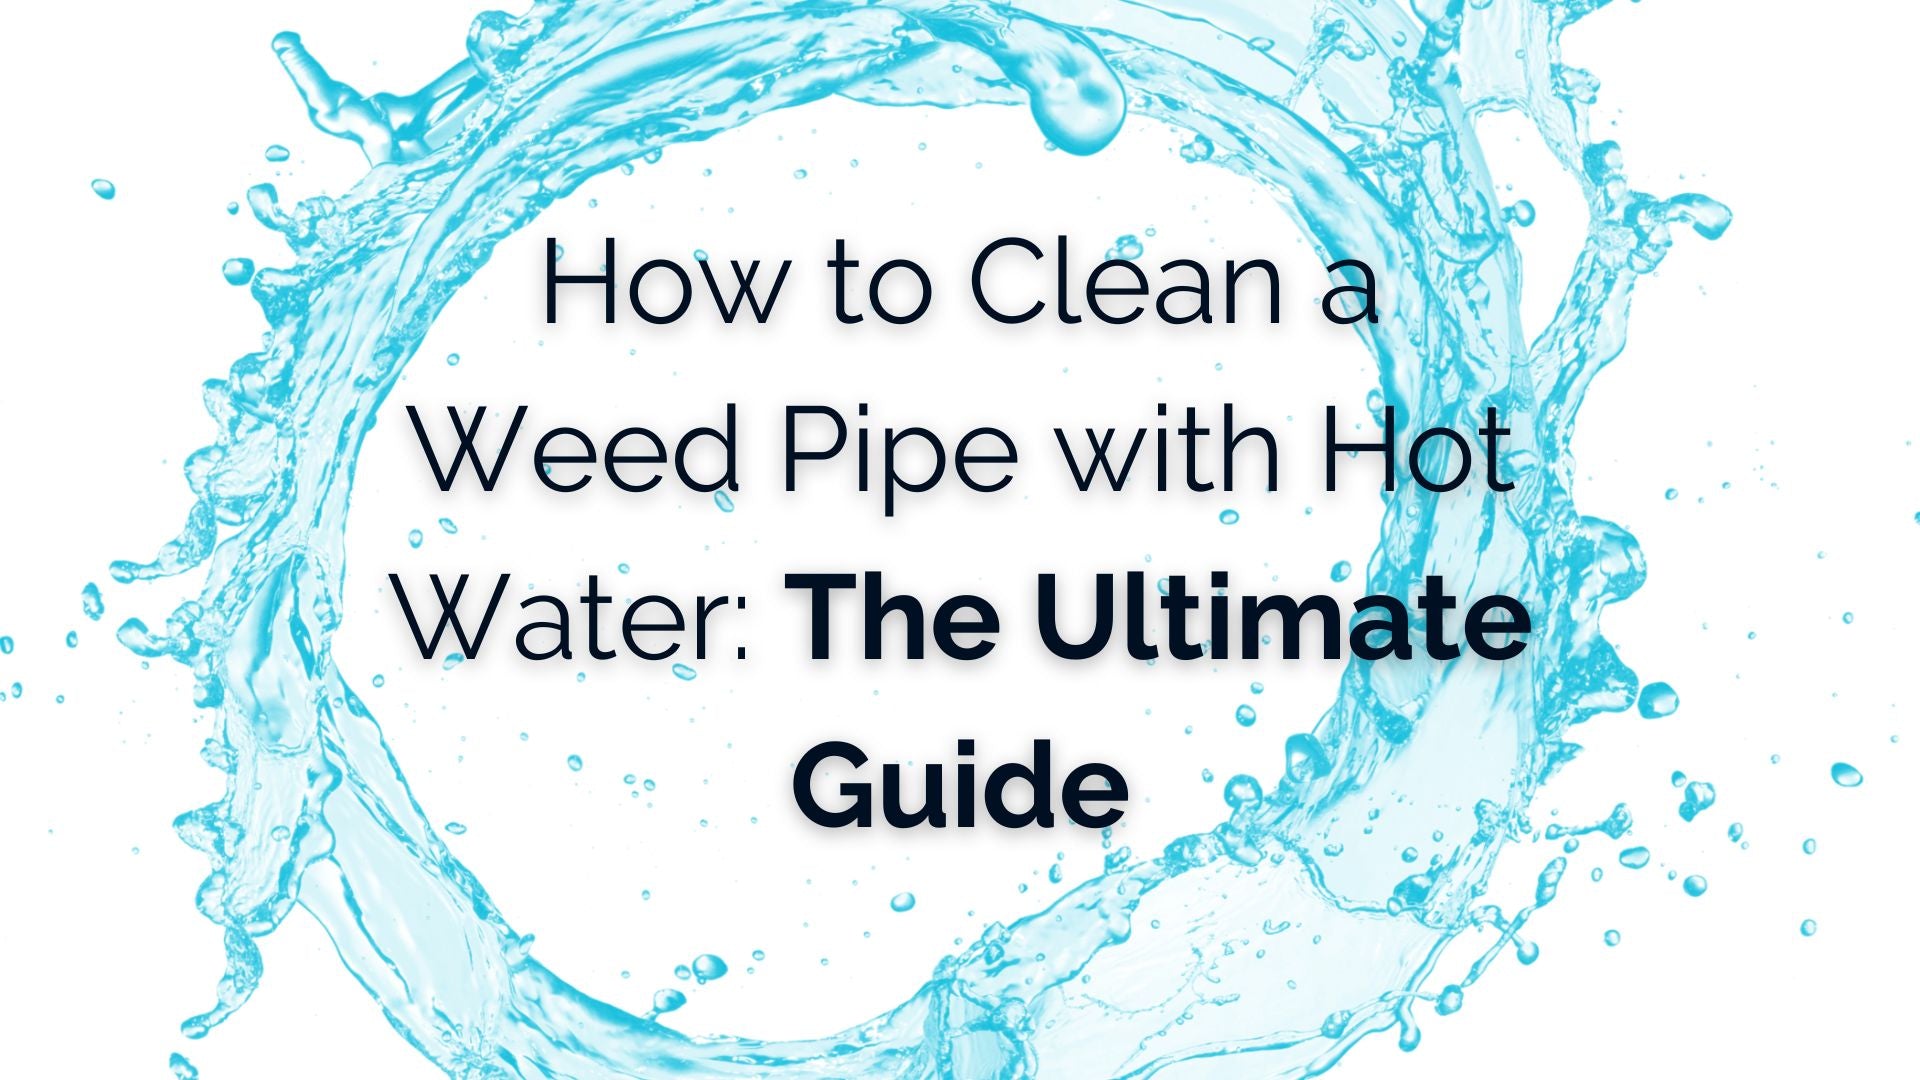 How To Smoke Weed From A Pipe in 3 Simple Steps